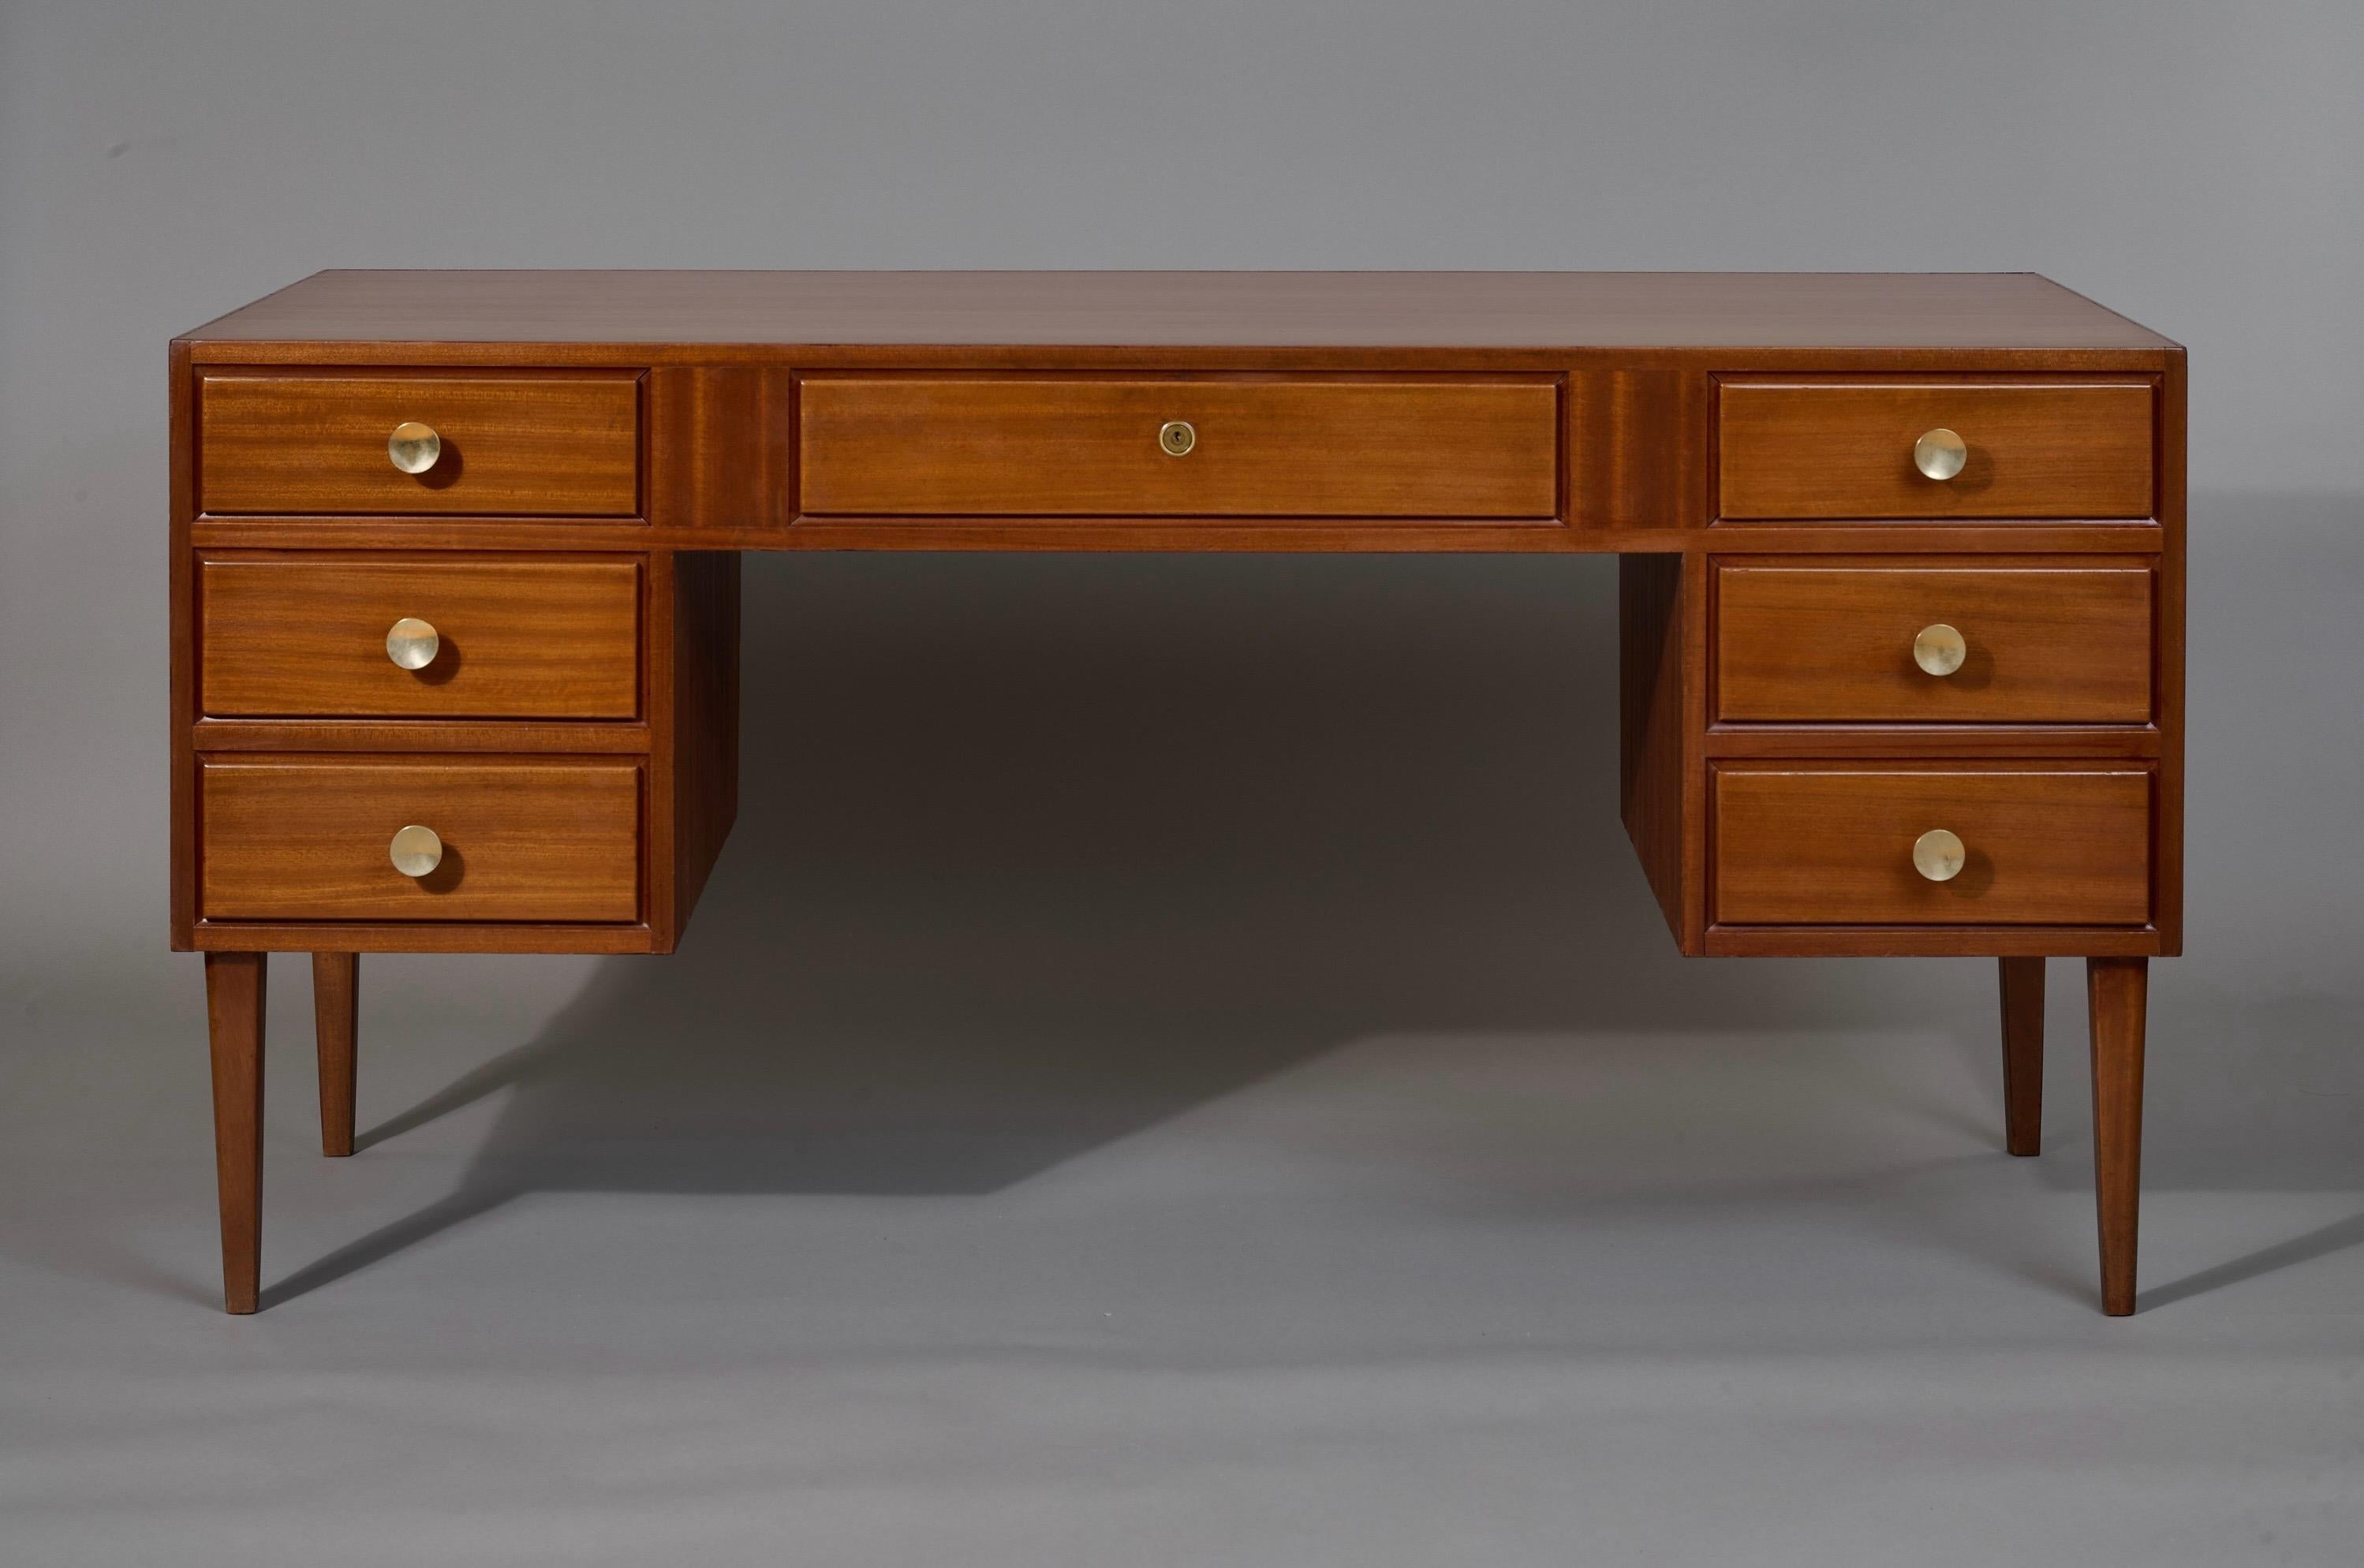 Gio Ponti: Monumental Executive Desk in Reeded Walnut and Brass, Italy 1950s For Sale 1